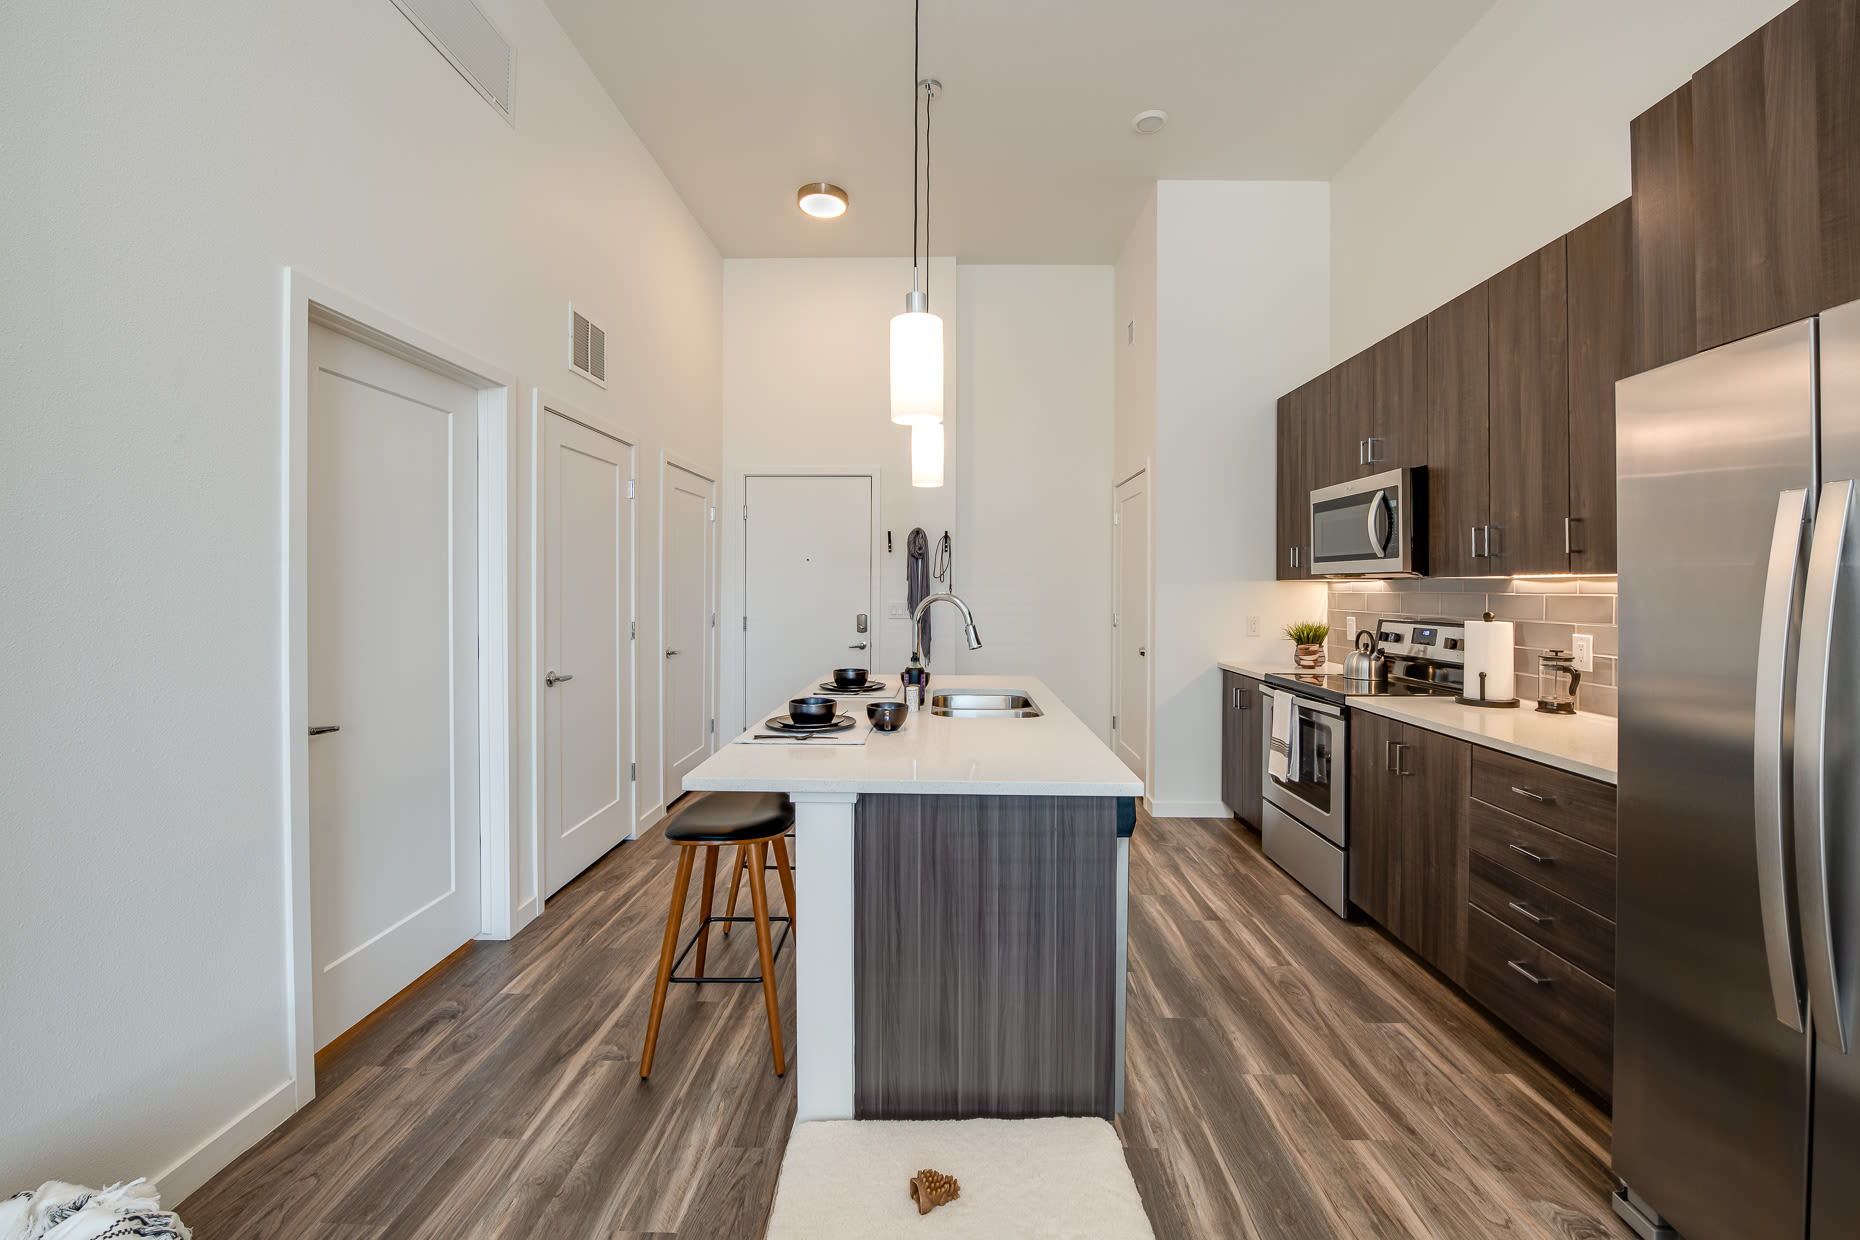 Fully appointed kitchen with wood-style floors at West 38 in Wheat Ridge, Colorado